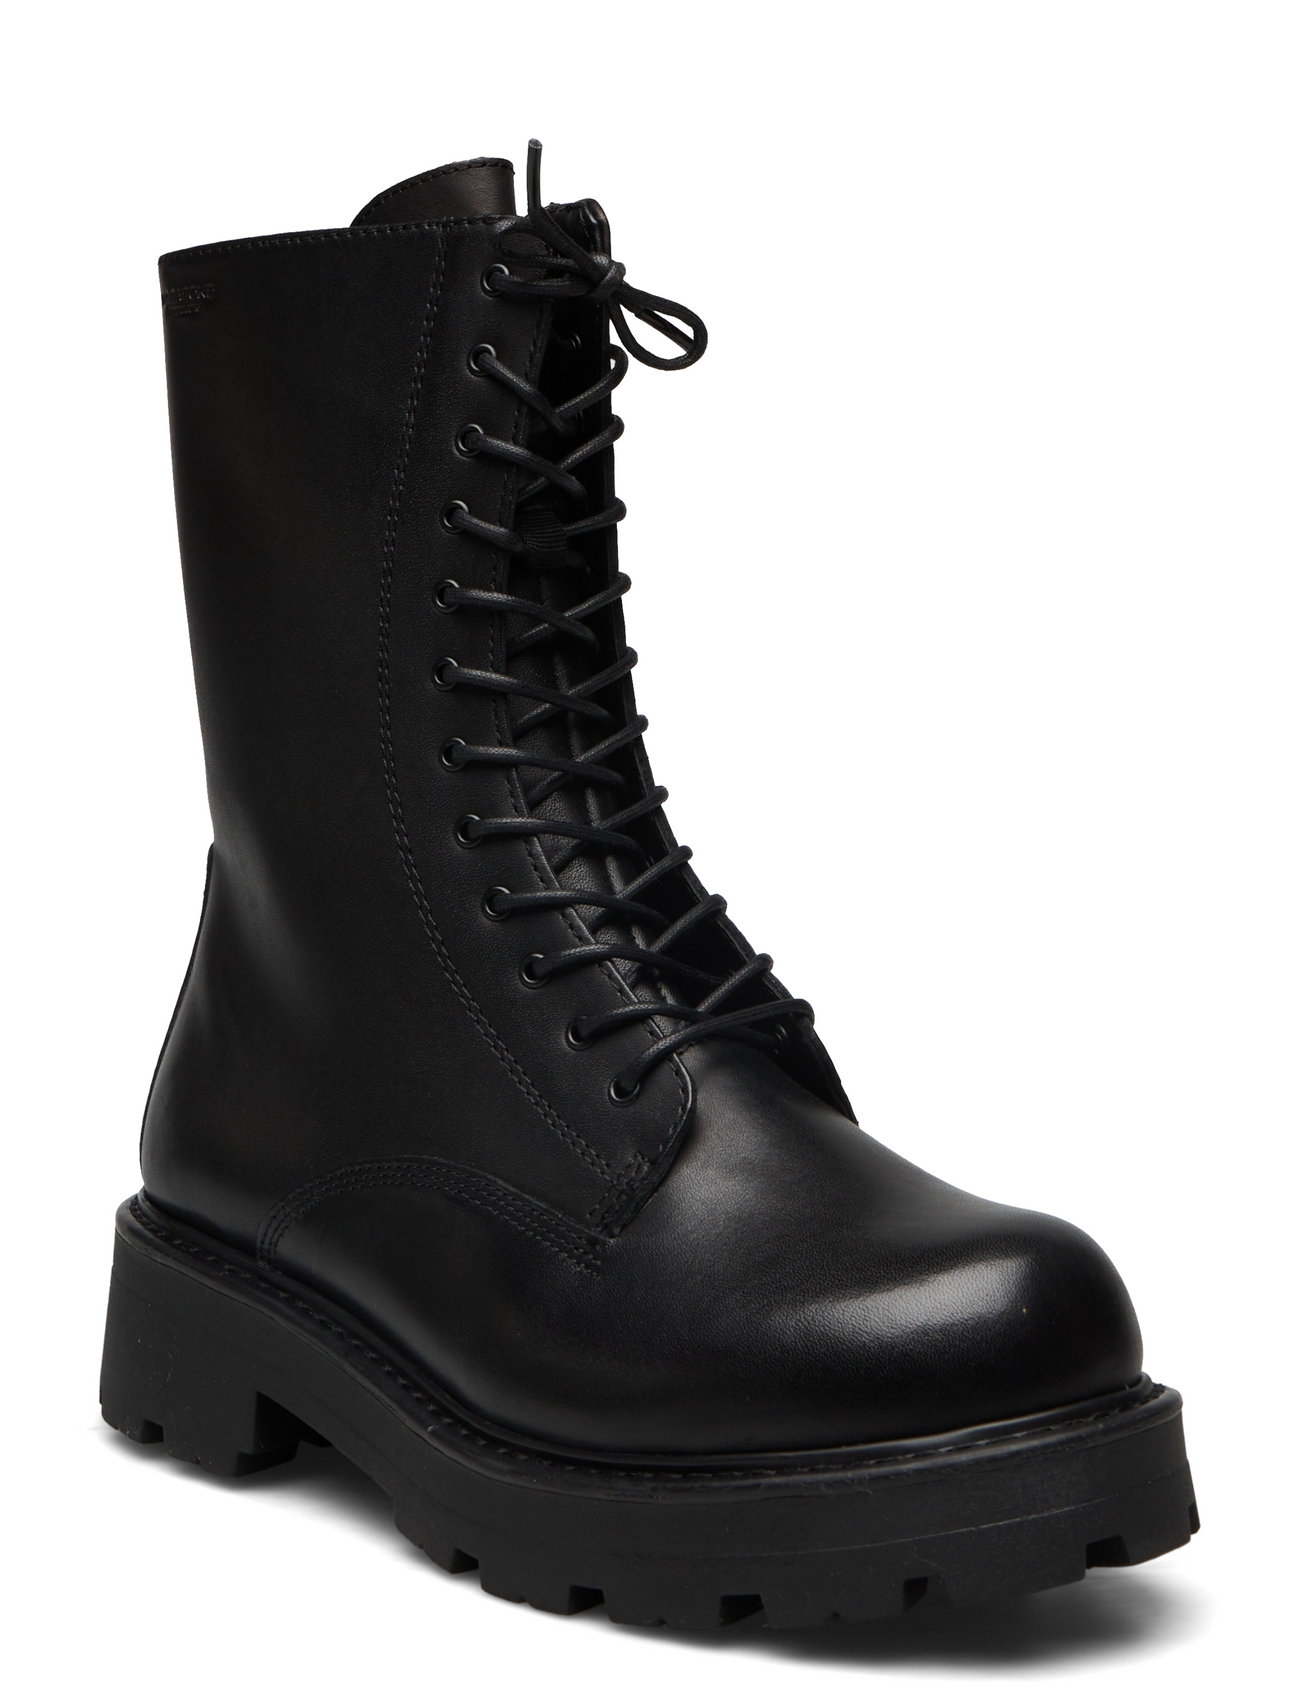 VAGABOND Cosmo 2.0 - Ankle boots - Boozt.com